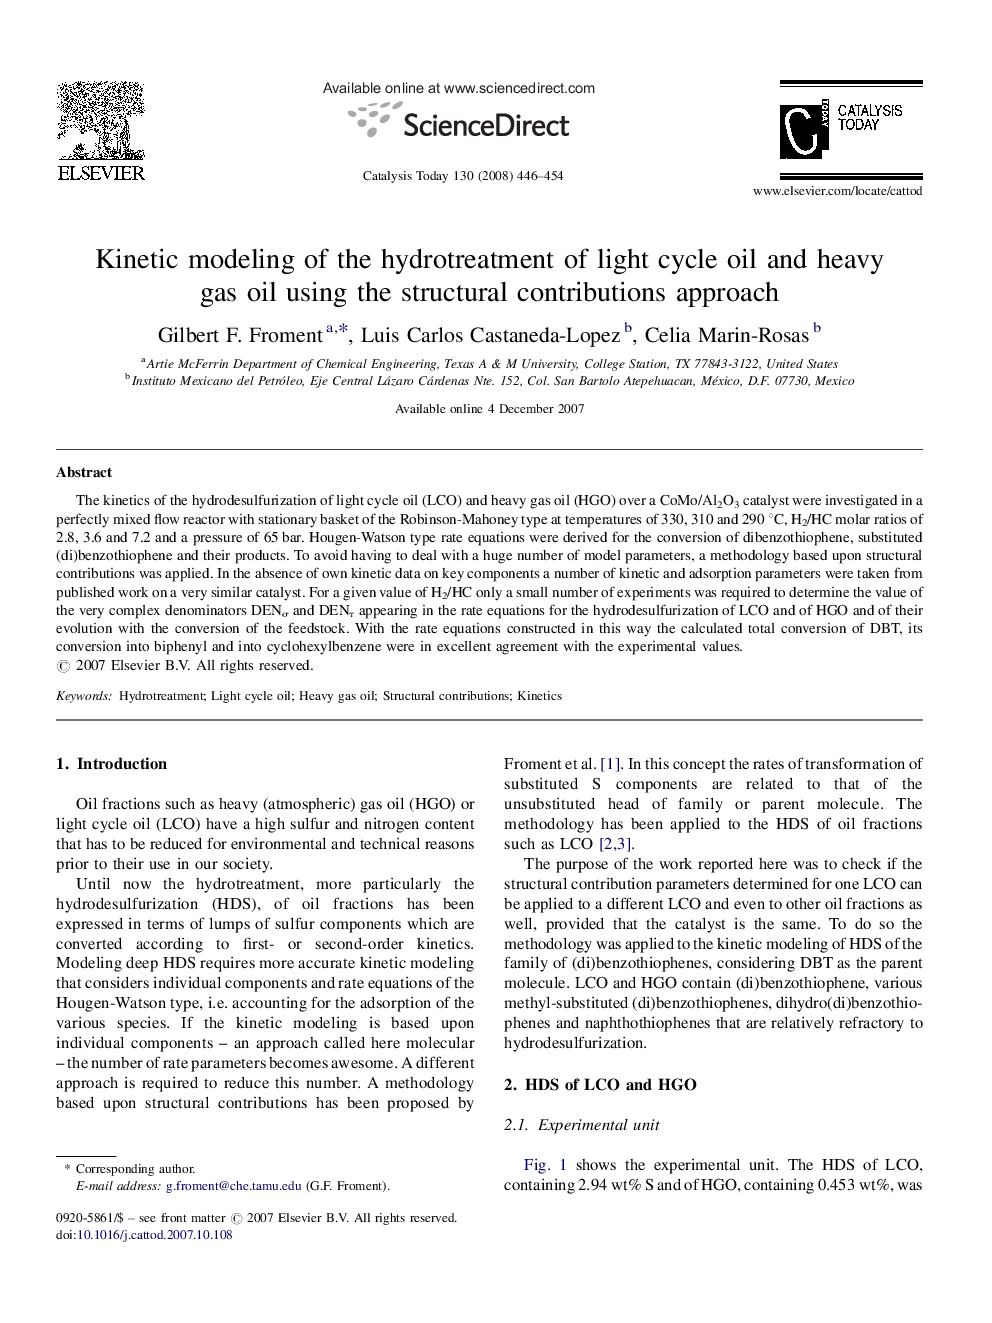 Kinetic modeling of the hydrotreatment of light cycle oil and heavy gas oil using the structural contributions approach